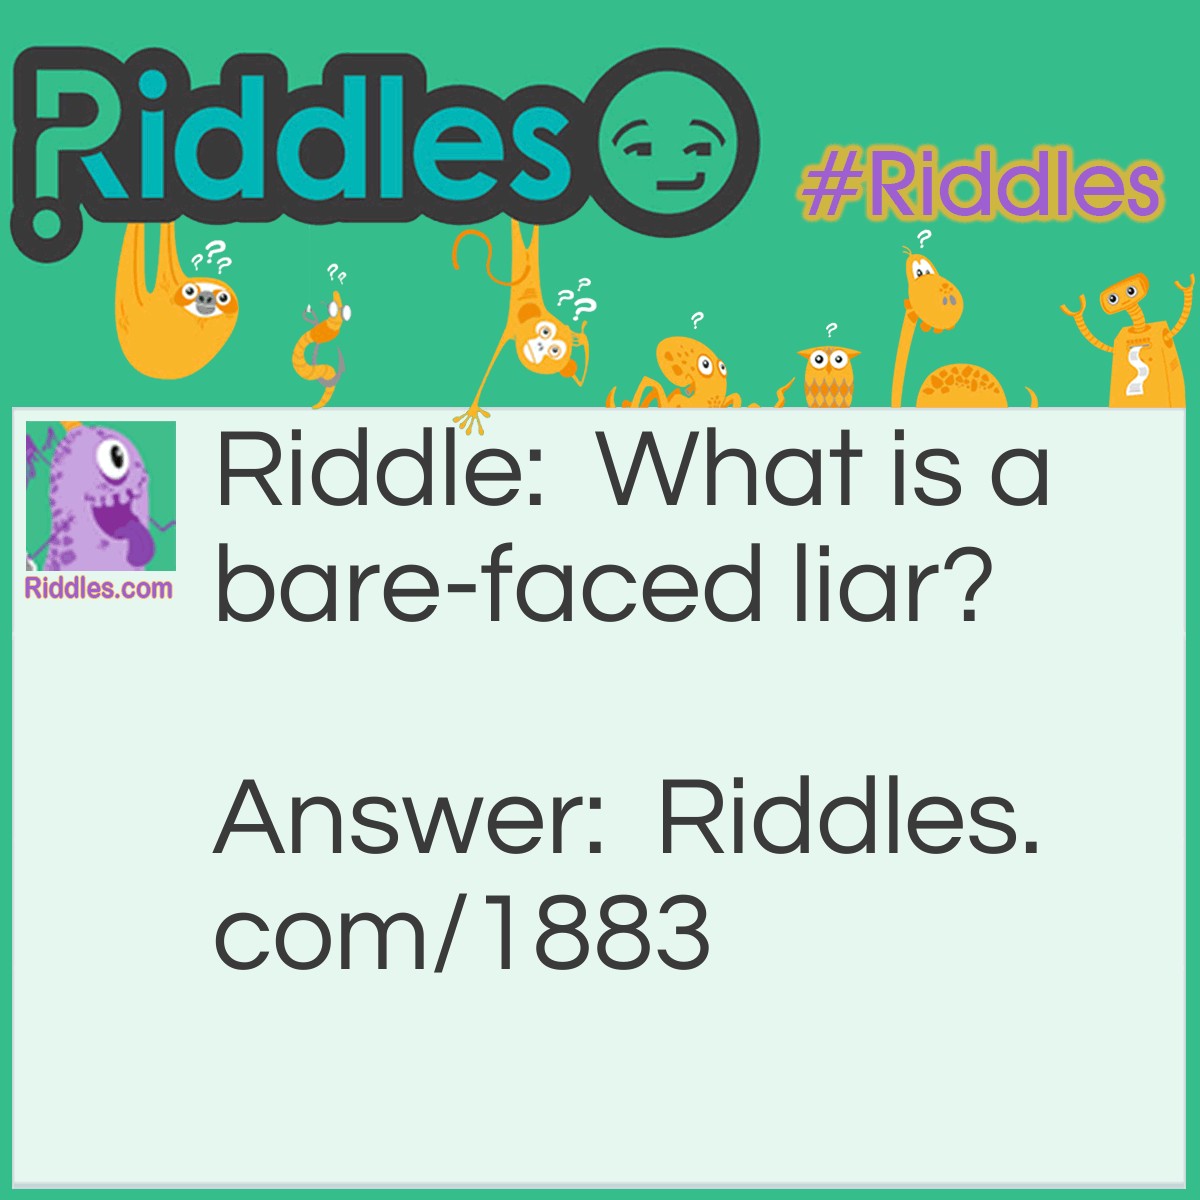 Riddle: What is a bare-faced liar? Answer: One without whiskers.